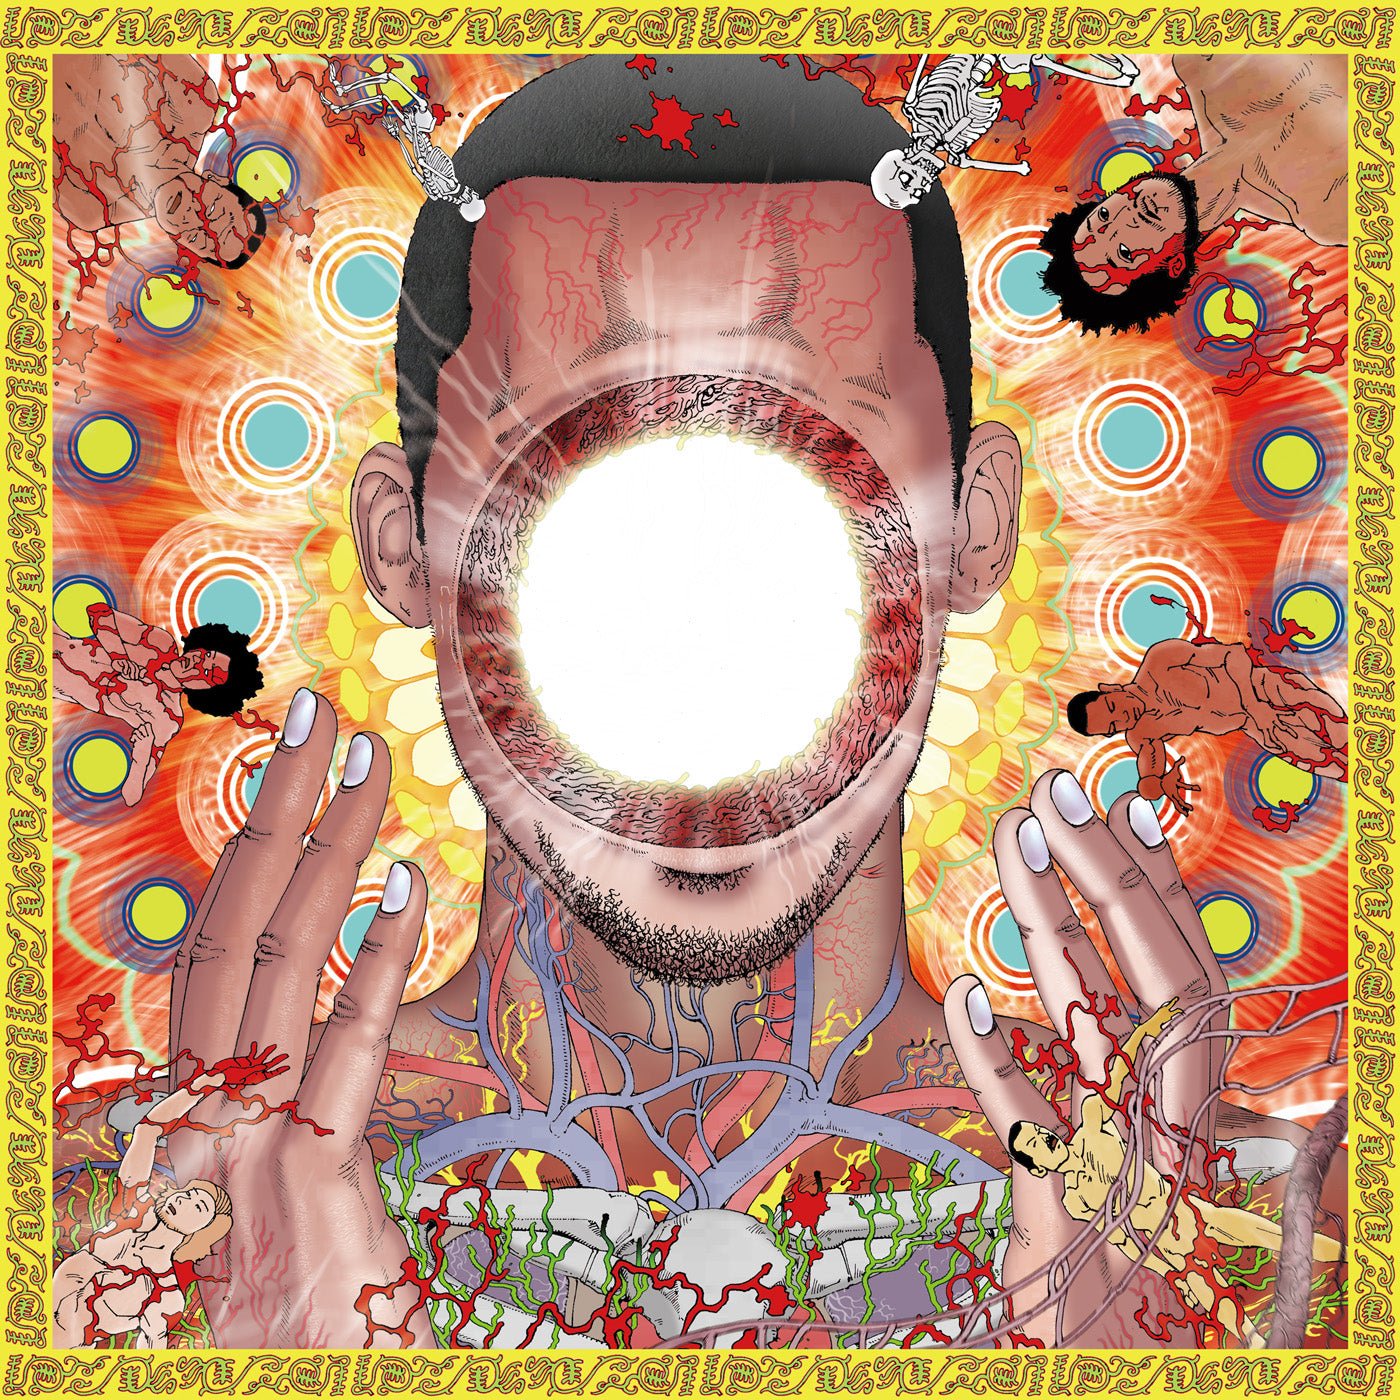 Flying Lotus - You're Dead (Digital Download) - 801061025618 - LP's - Yellow Racket Records